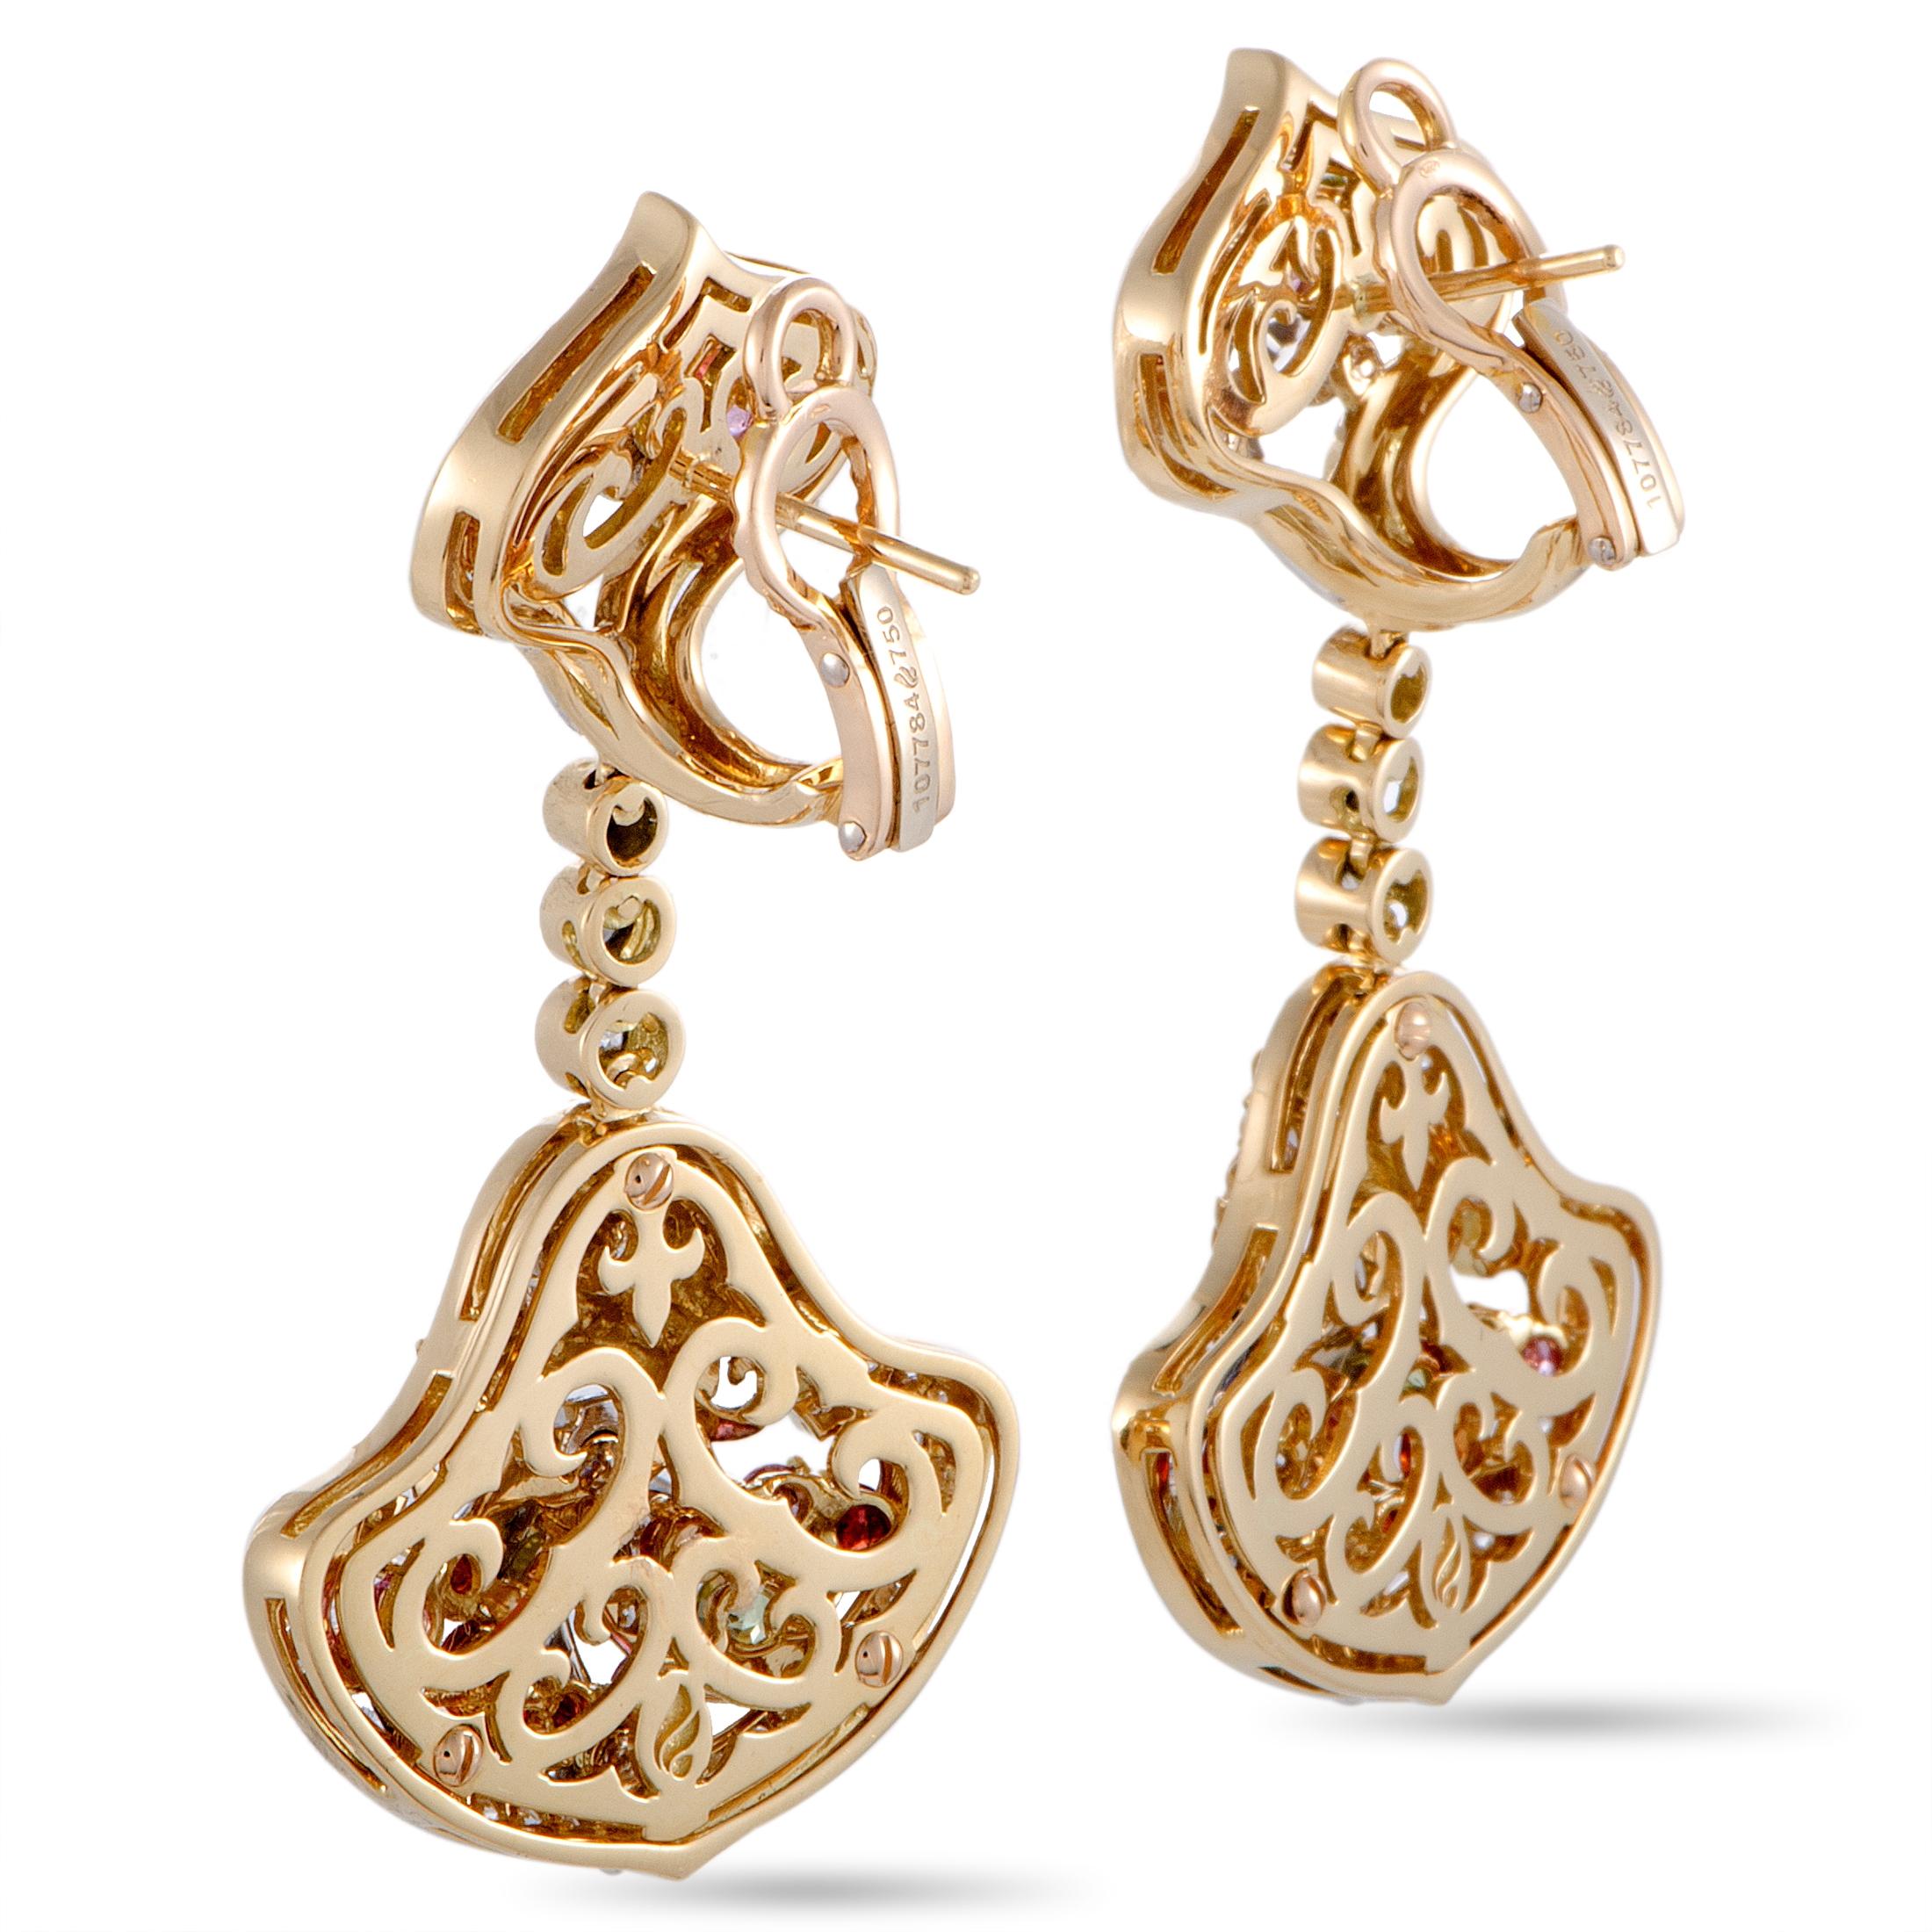 These extravagant “Versailles” earrings from Magerit will attractively accentuate your ensembles thanks to the incredibly imaginative design that is wonderfully topped off with a plethora of eye-catching gems. The pair is made of 18K yellow gold and